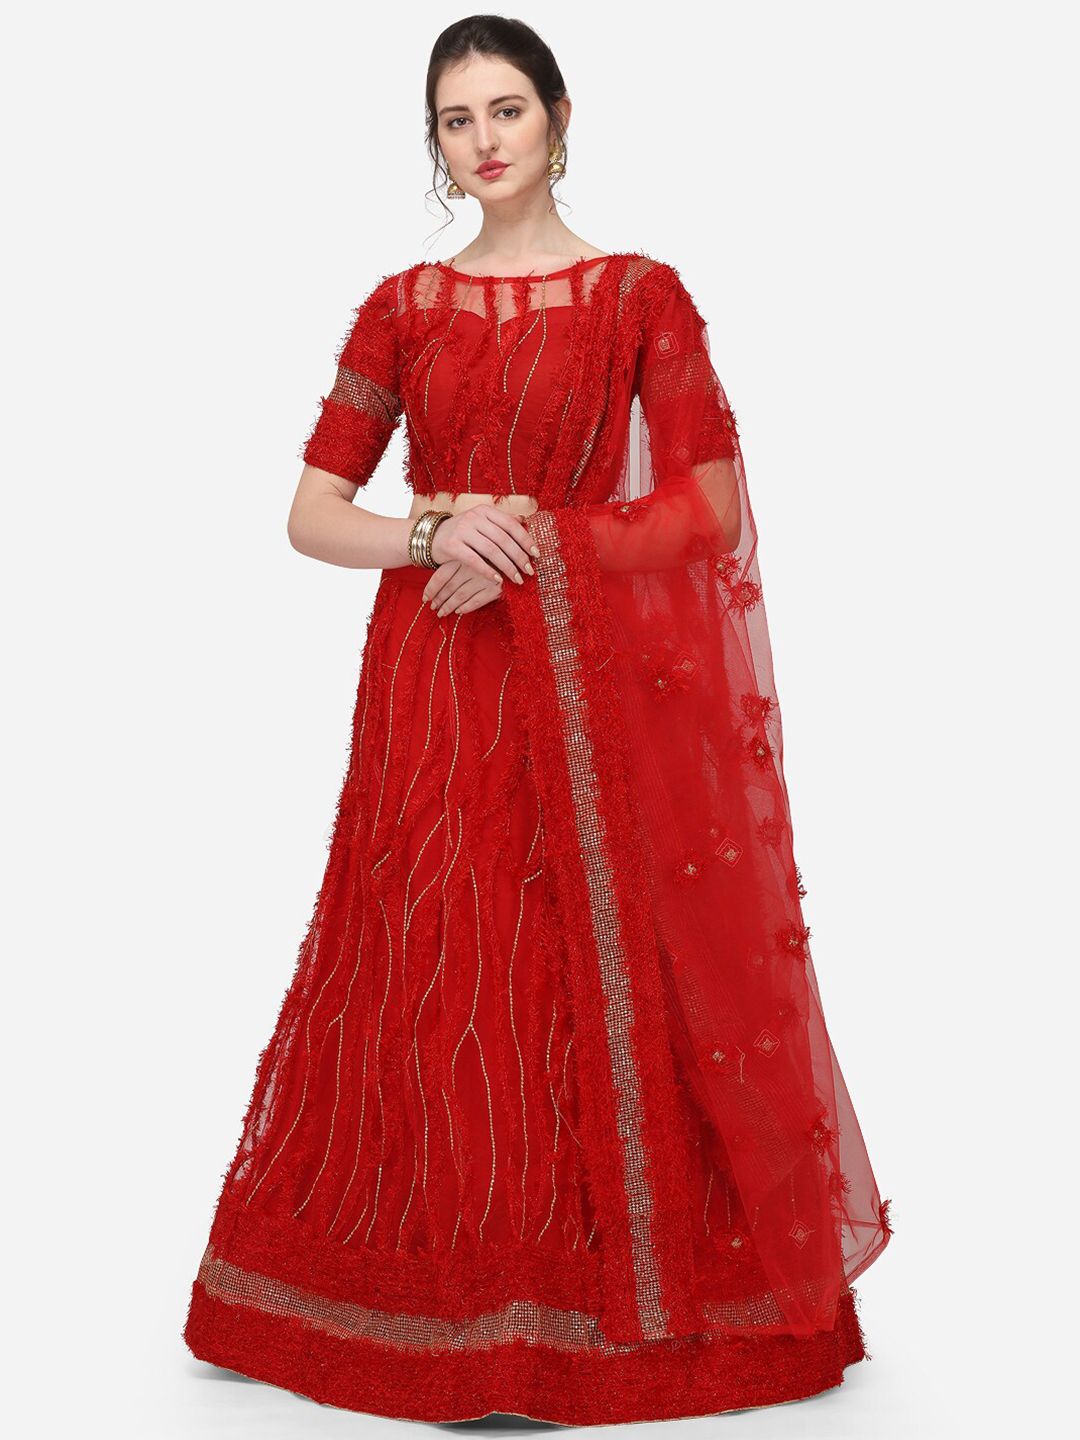 JATRIQQ Women Red Embroidered Semi-Stitched Lehenga & Unstitched Blouse with Dupatta Price in India